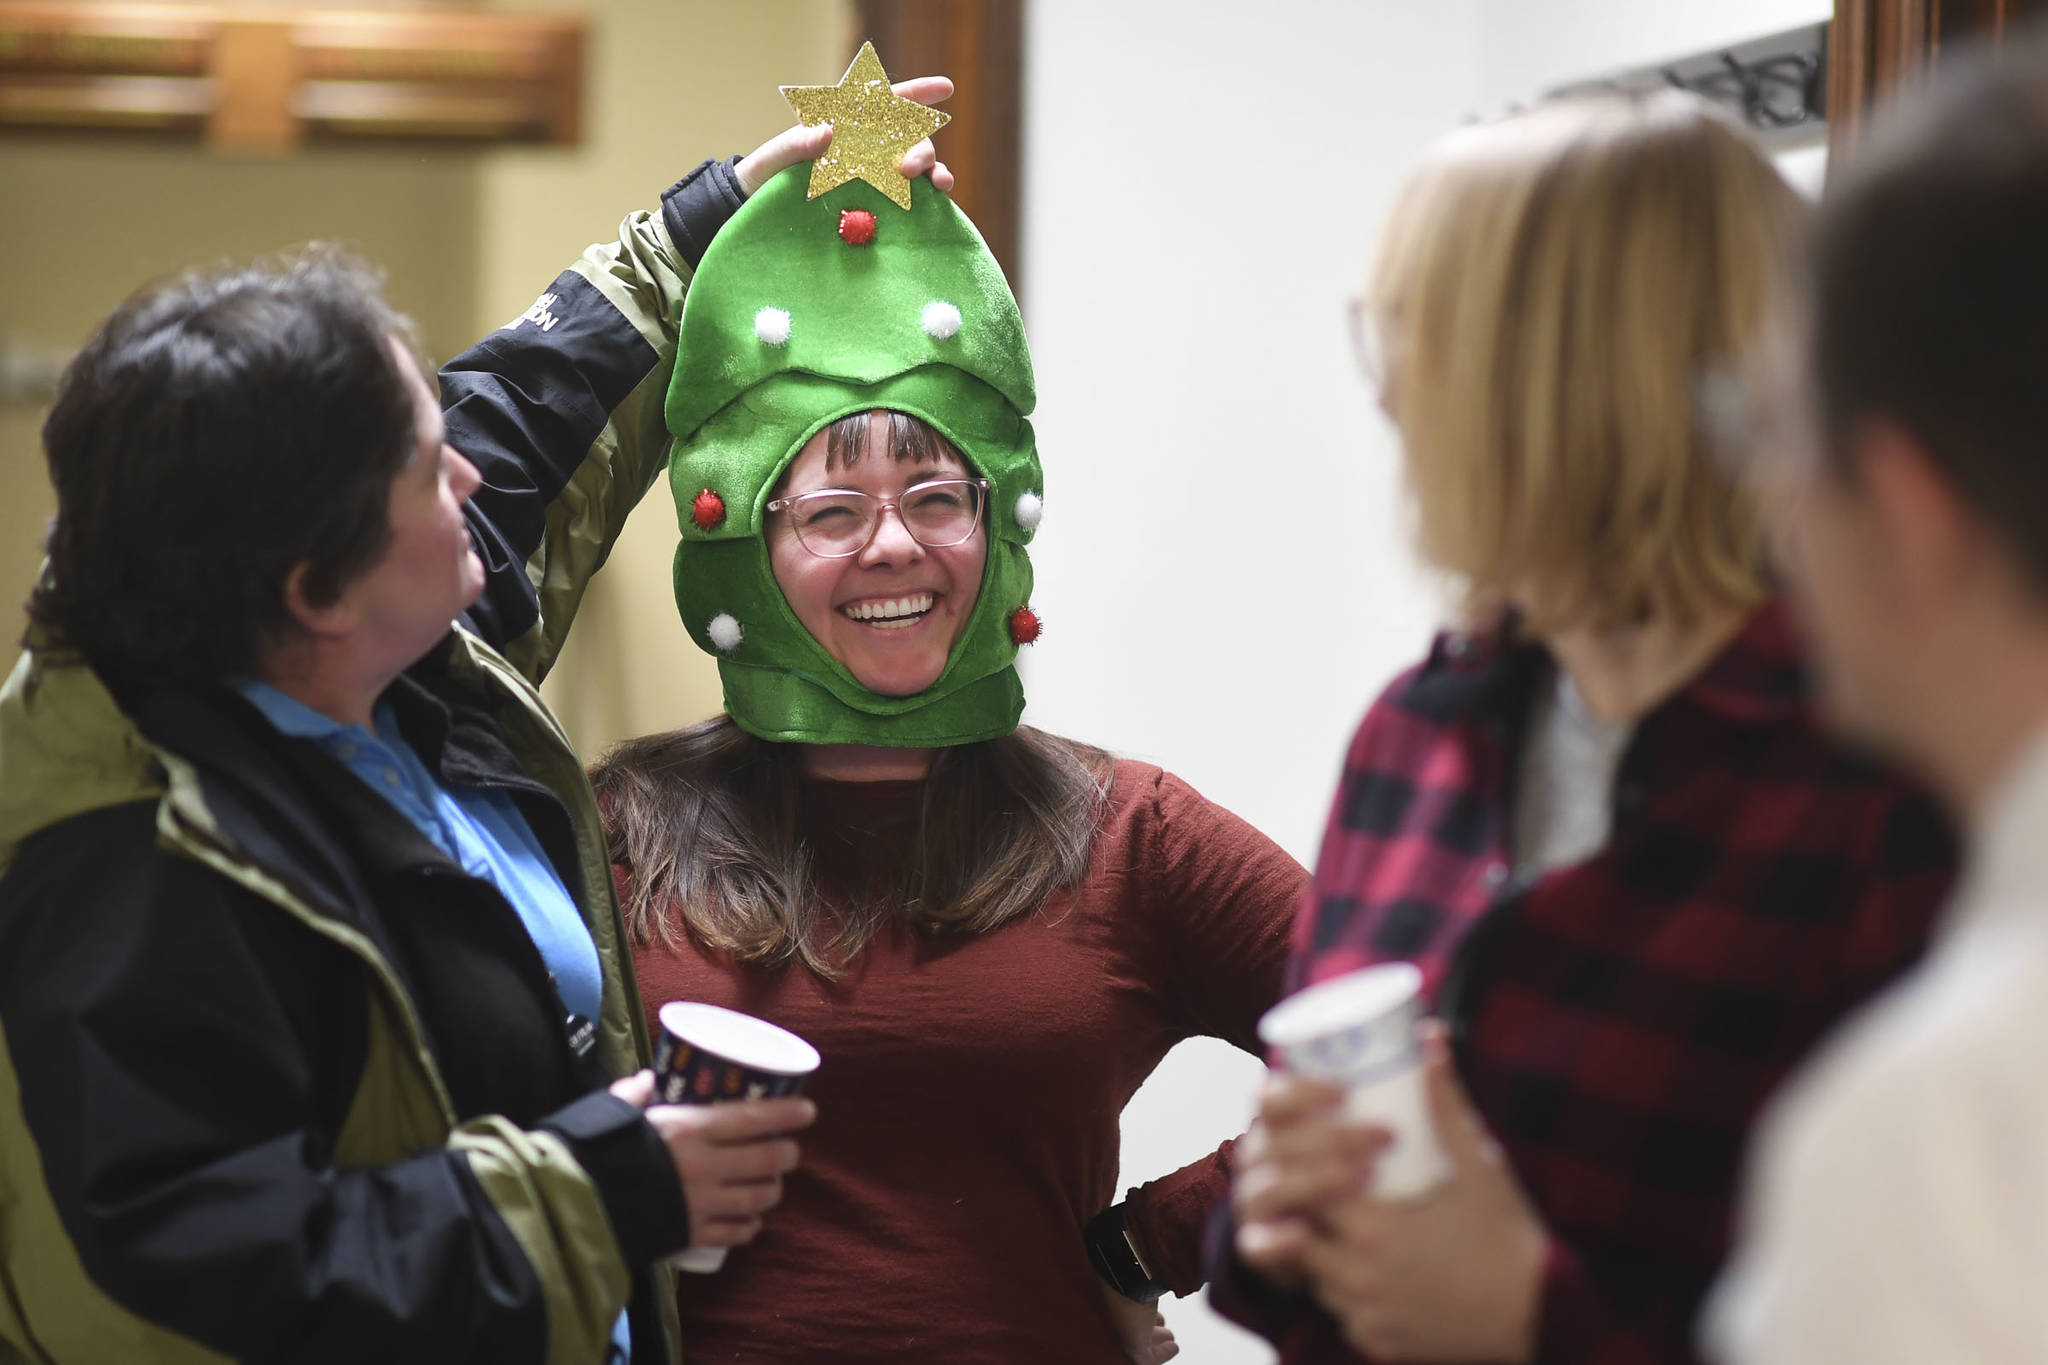 Caitlyn Ellis, a legislative aide for Rep. Andi Story, has her Christmas headgear adjusted by Rebecca Smith, left, during a legislative open house at the Capitol on Friday, Dec. 20, 2019. (Michael Penn | Juneau Empire)